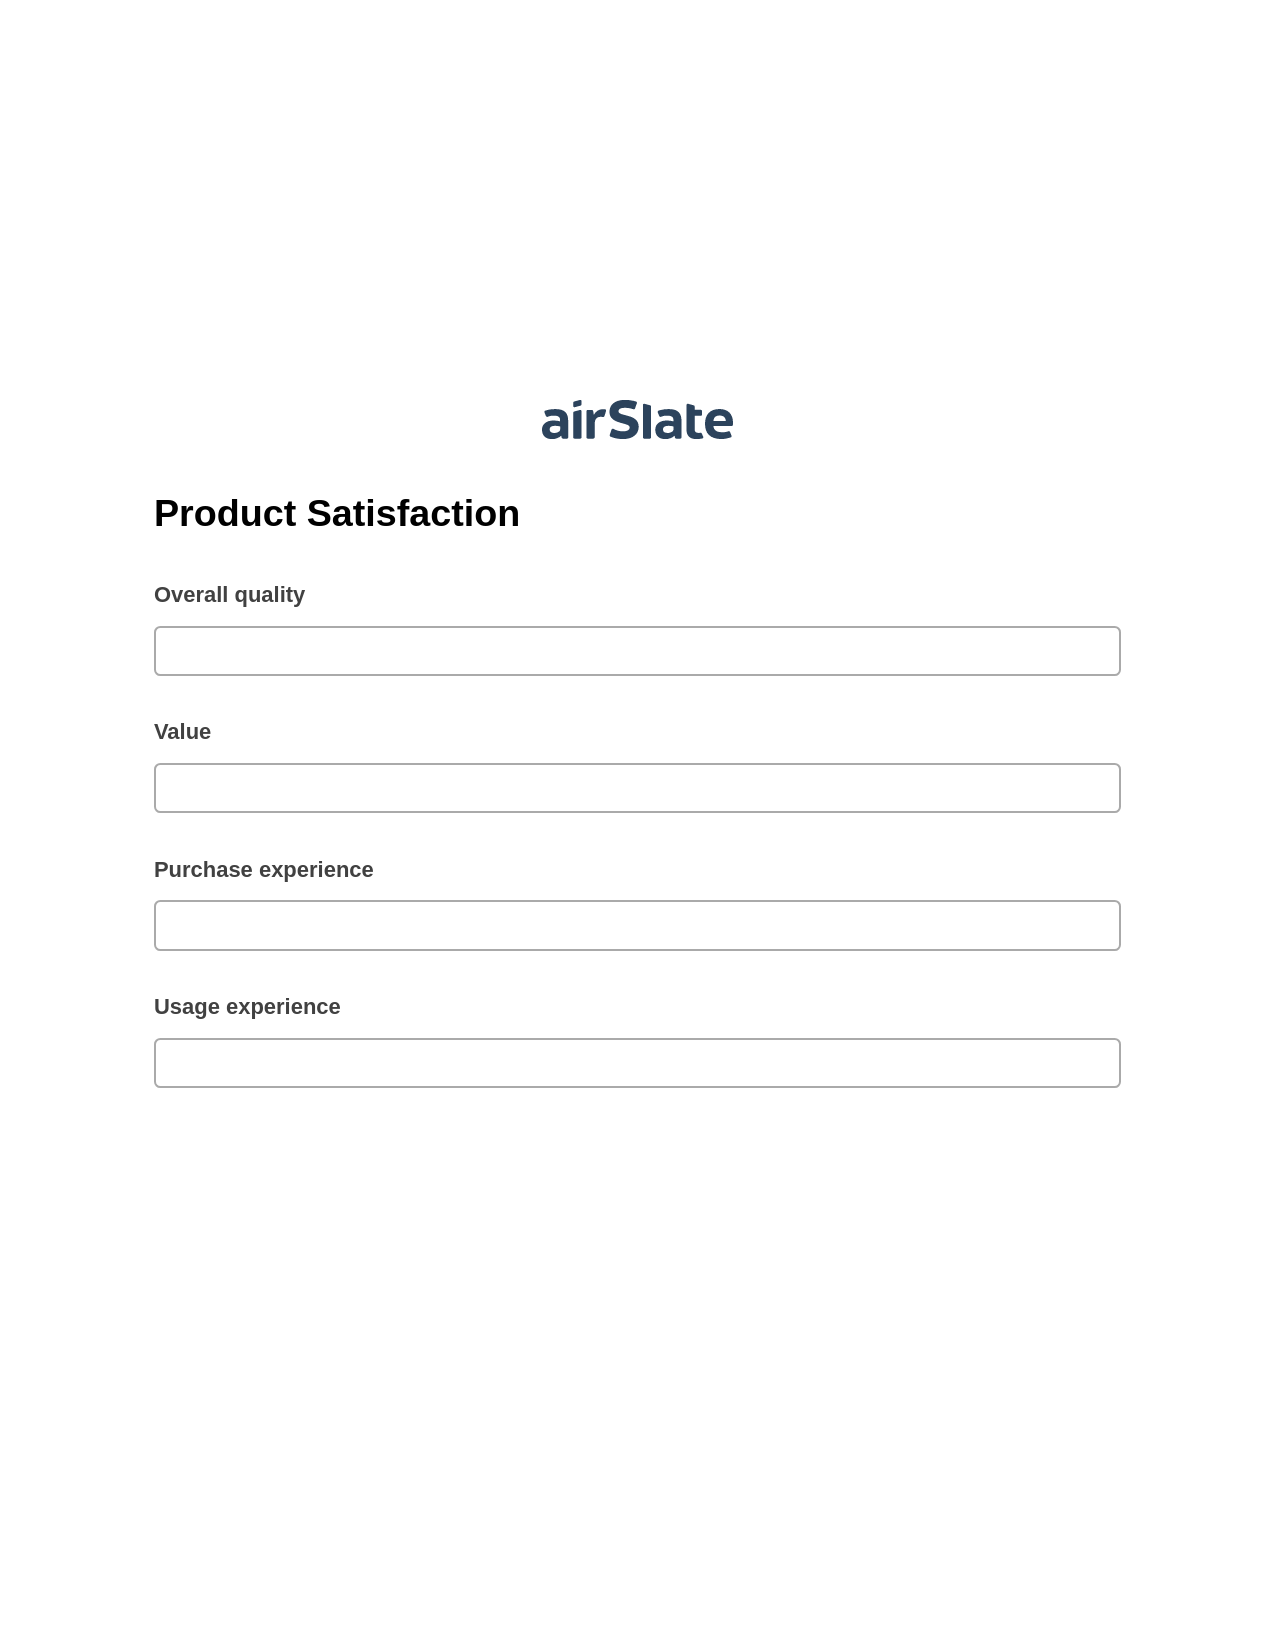 Multirole Product Satisfaction Pre-fill Slate from MS Dynamics 365 Records Bot, Send Mailchimp Campaign Bot, Google Drive Bot